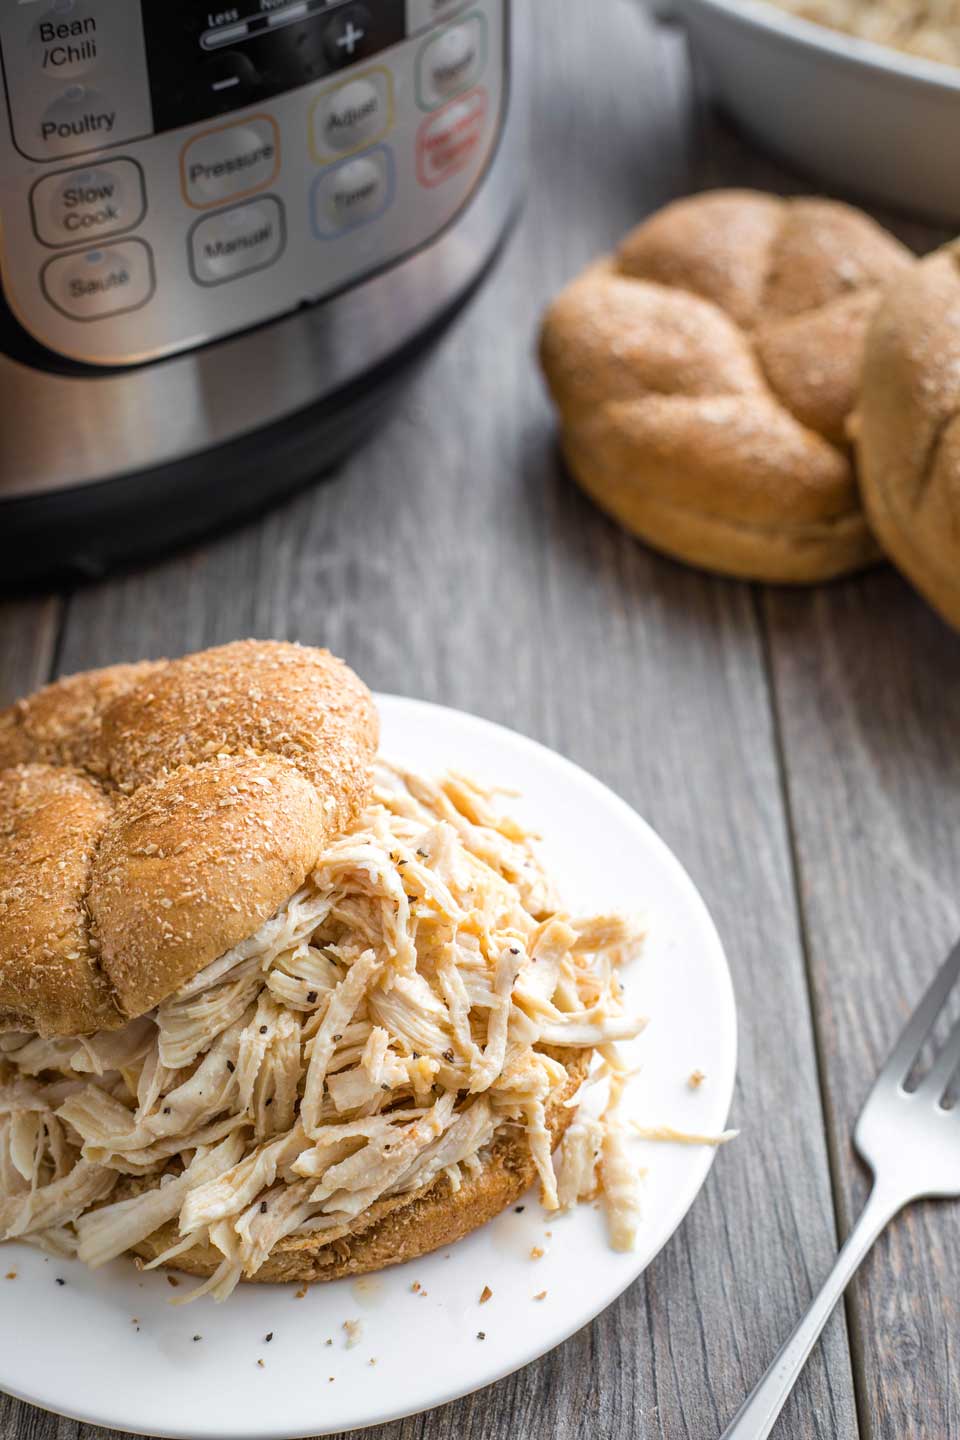 Instant Pot and buns in background with Instant Pot shredded chicken sandwich on a plate in the foreground